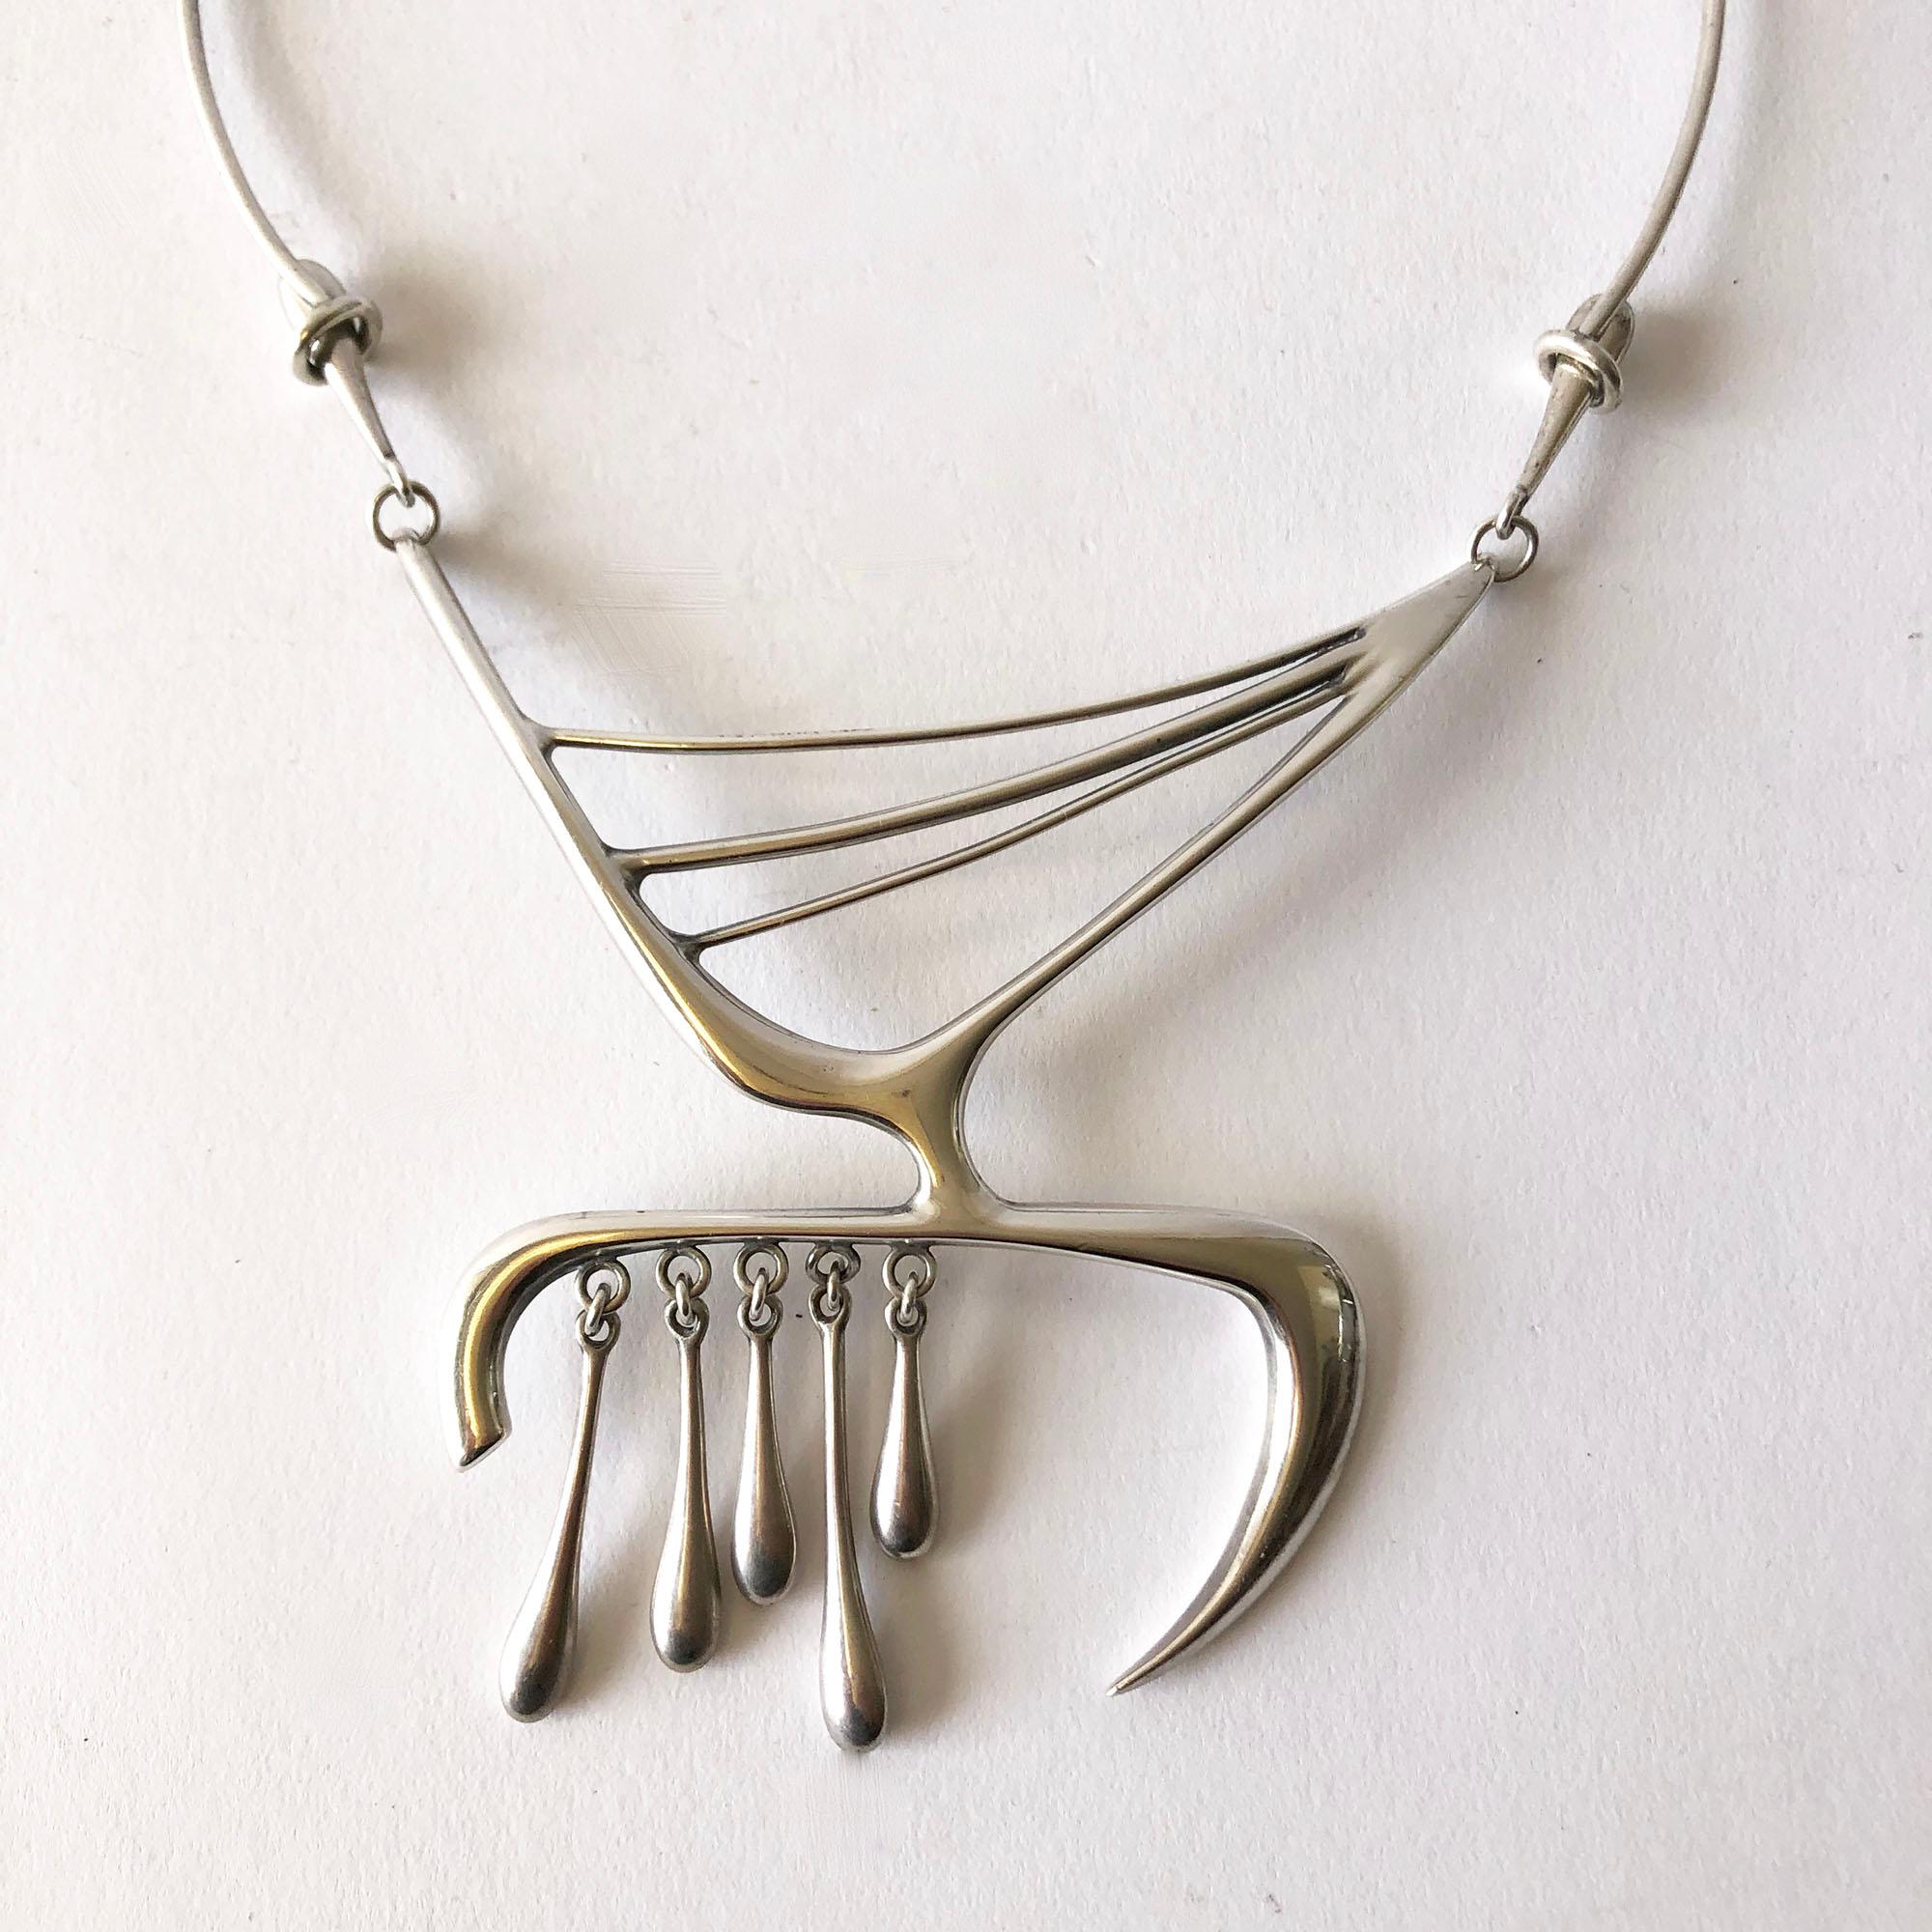 Important sterling silver abstract American modernist necklace created by sculptors and jewelers, Irvin and Bonnie Burkee.  Necklace is comprised of hand forged, webbed sterling silver and a highly inventive fastening mechanism on both sides of the